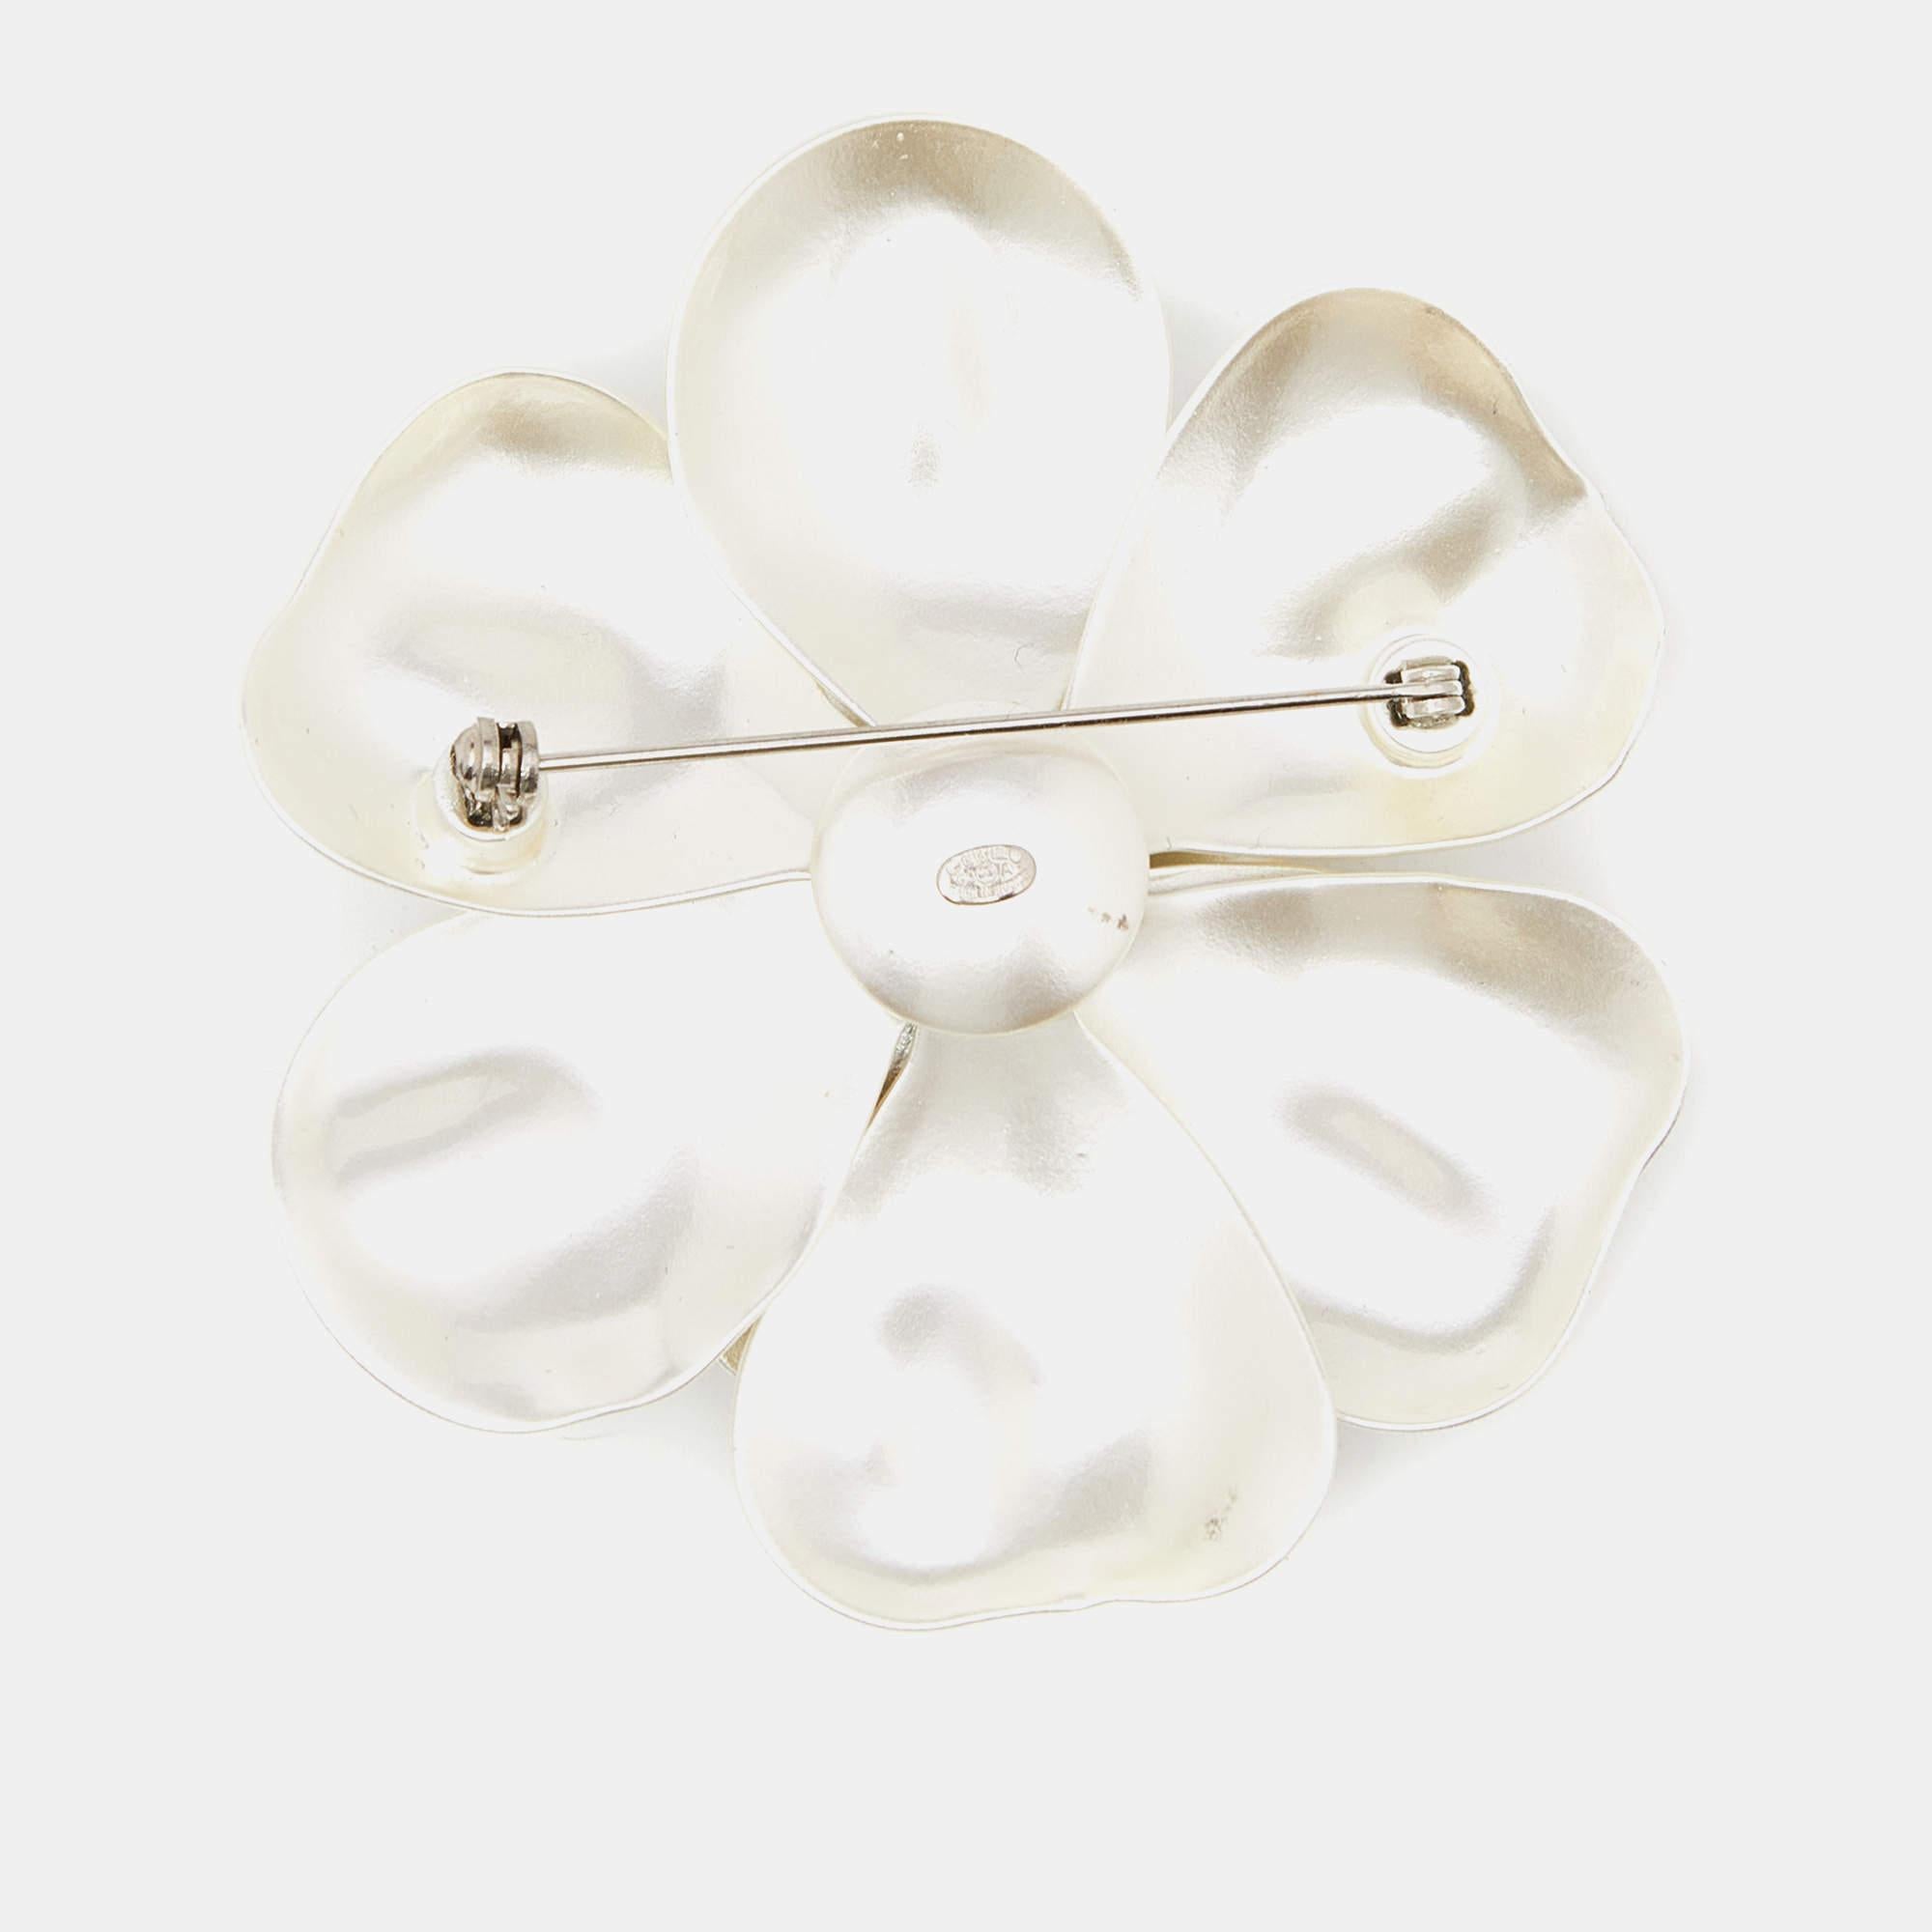 Made by Chanel, the brooch will elevate your look in the best way possible. Perfect pick to accessorize your clothes!

